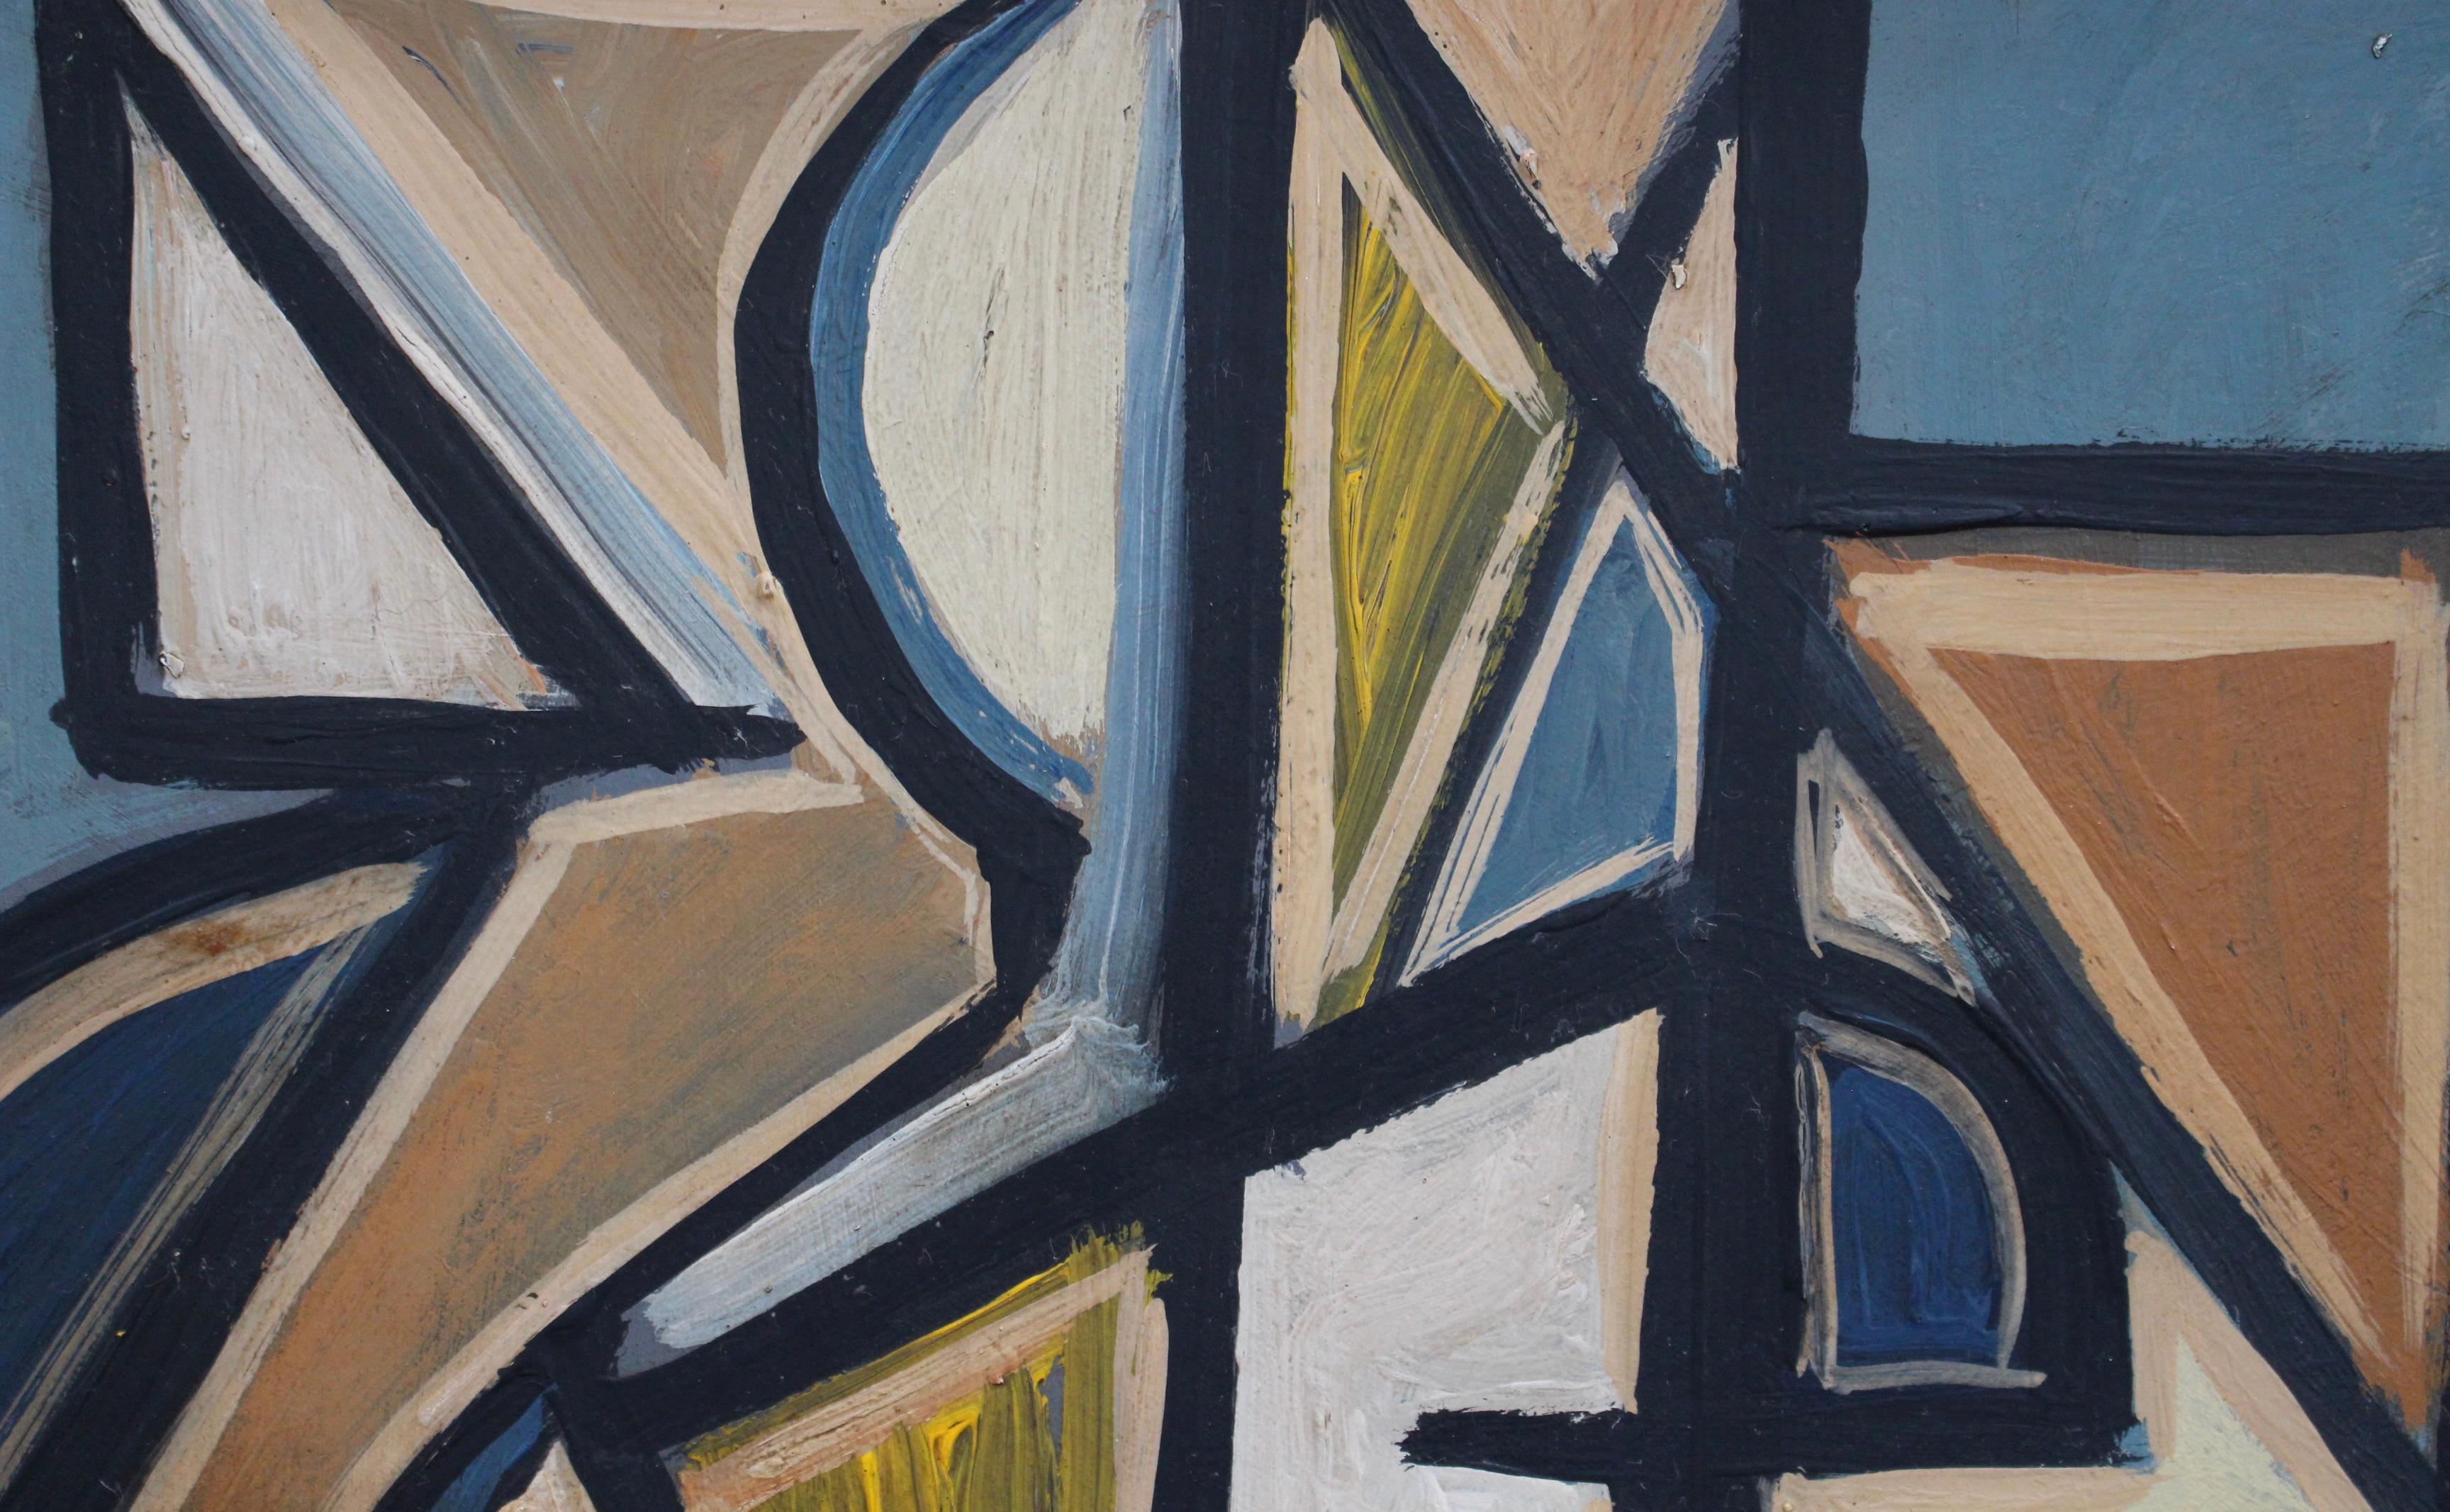 'Cubist Composition in Colour', oil on board, by STM (circa 1960s). A vibrant modern painting inspired by Picasso and Braque, the artist uses angles, lines and vibrant colours to create an entirely new dimension to painting. Cubists abandoned